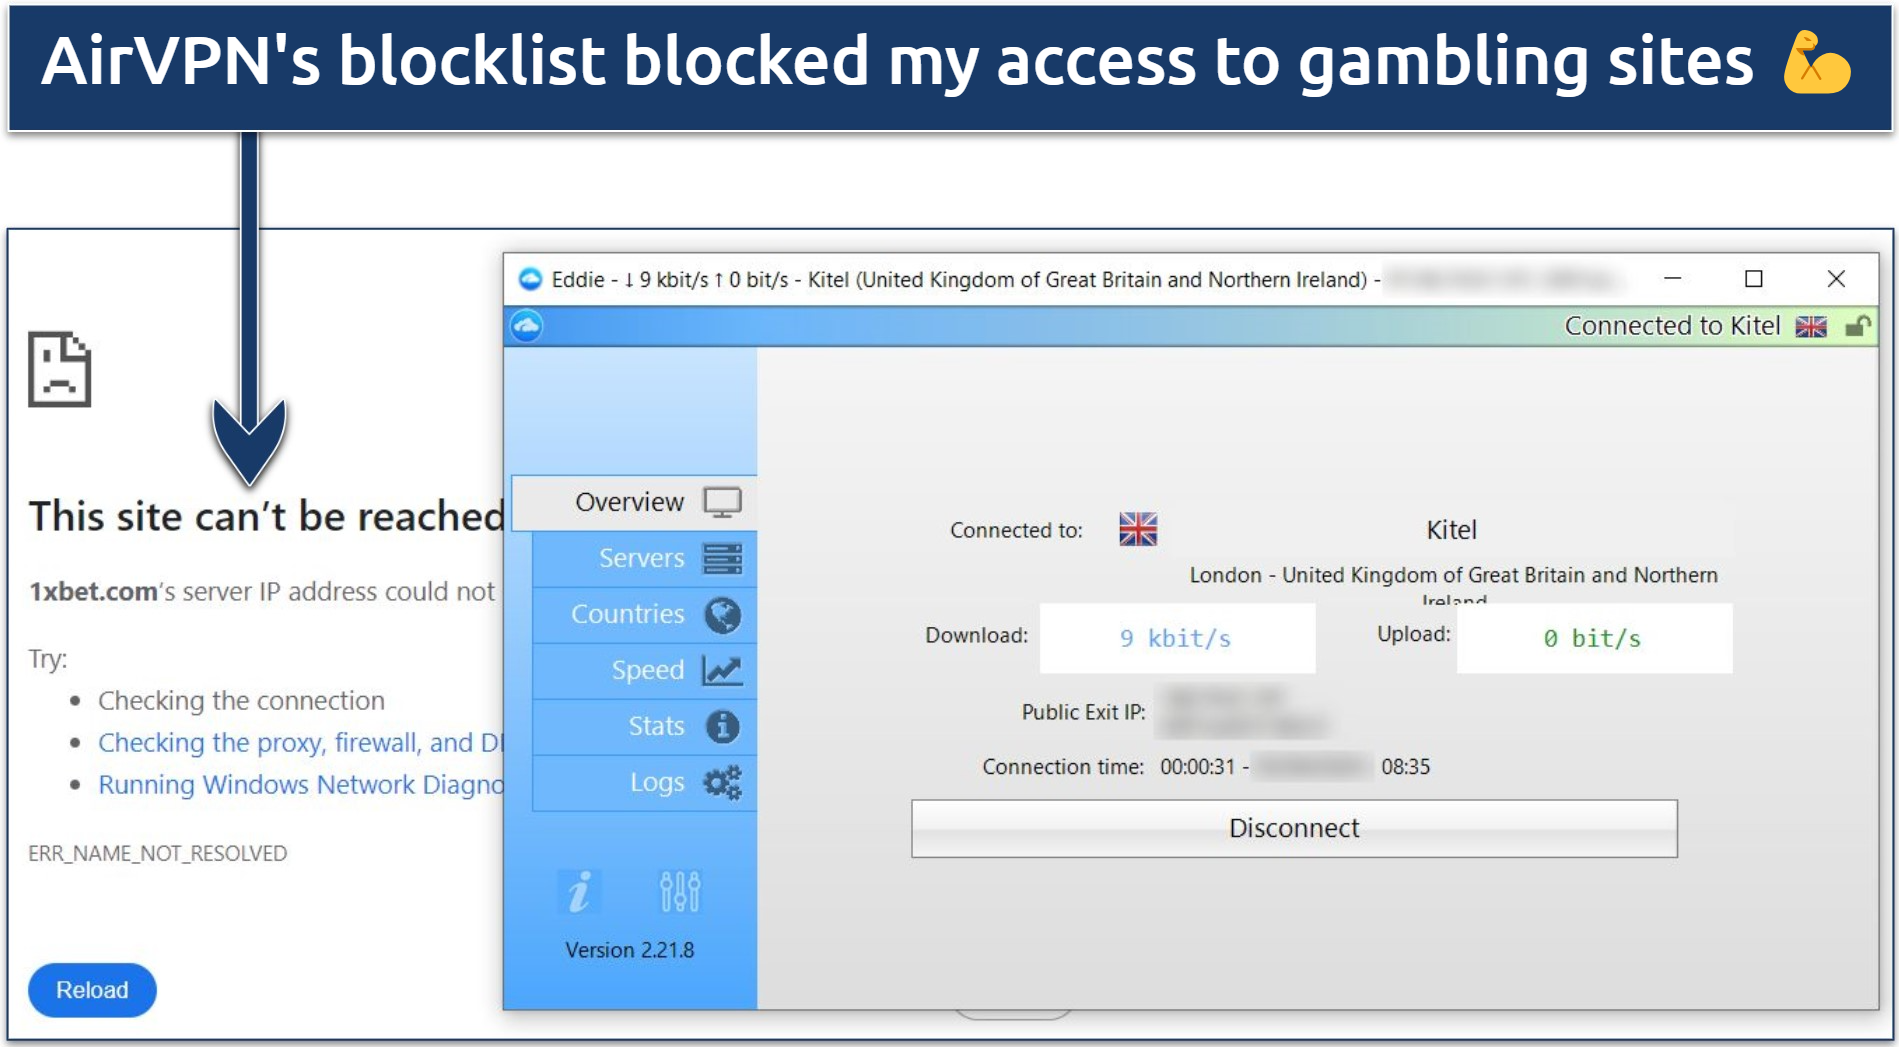 A screenshot showing AirVPN's dns blocklist prevented access to 1xbet